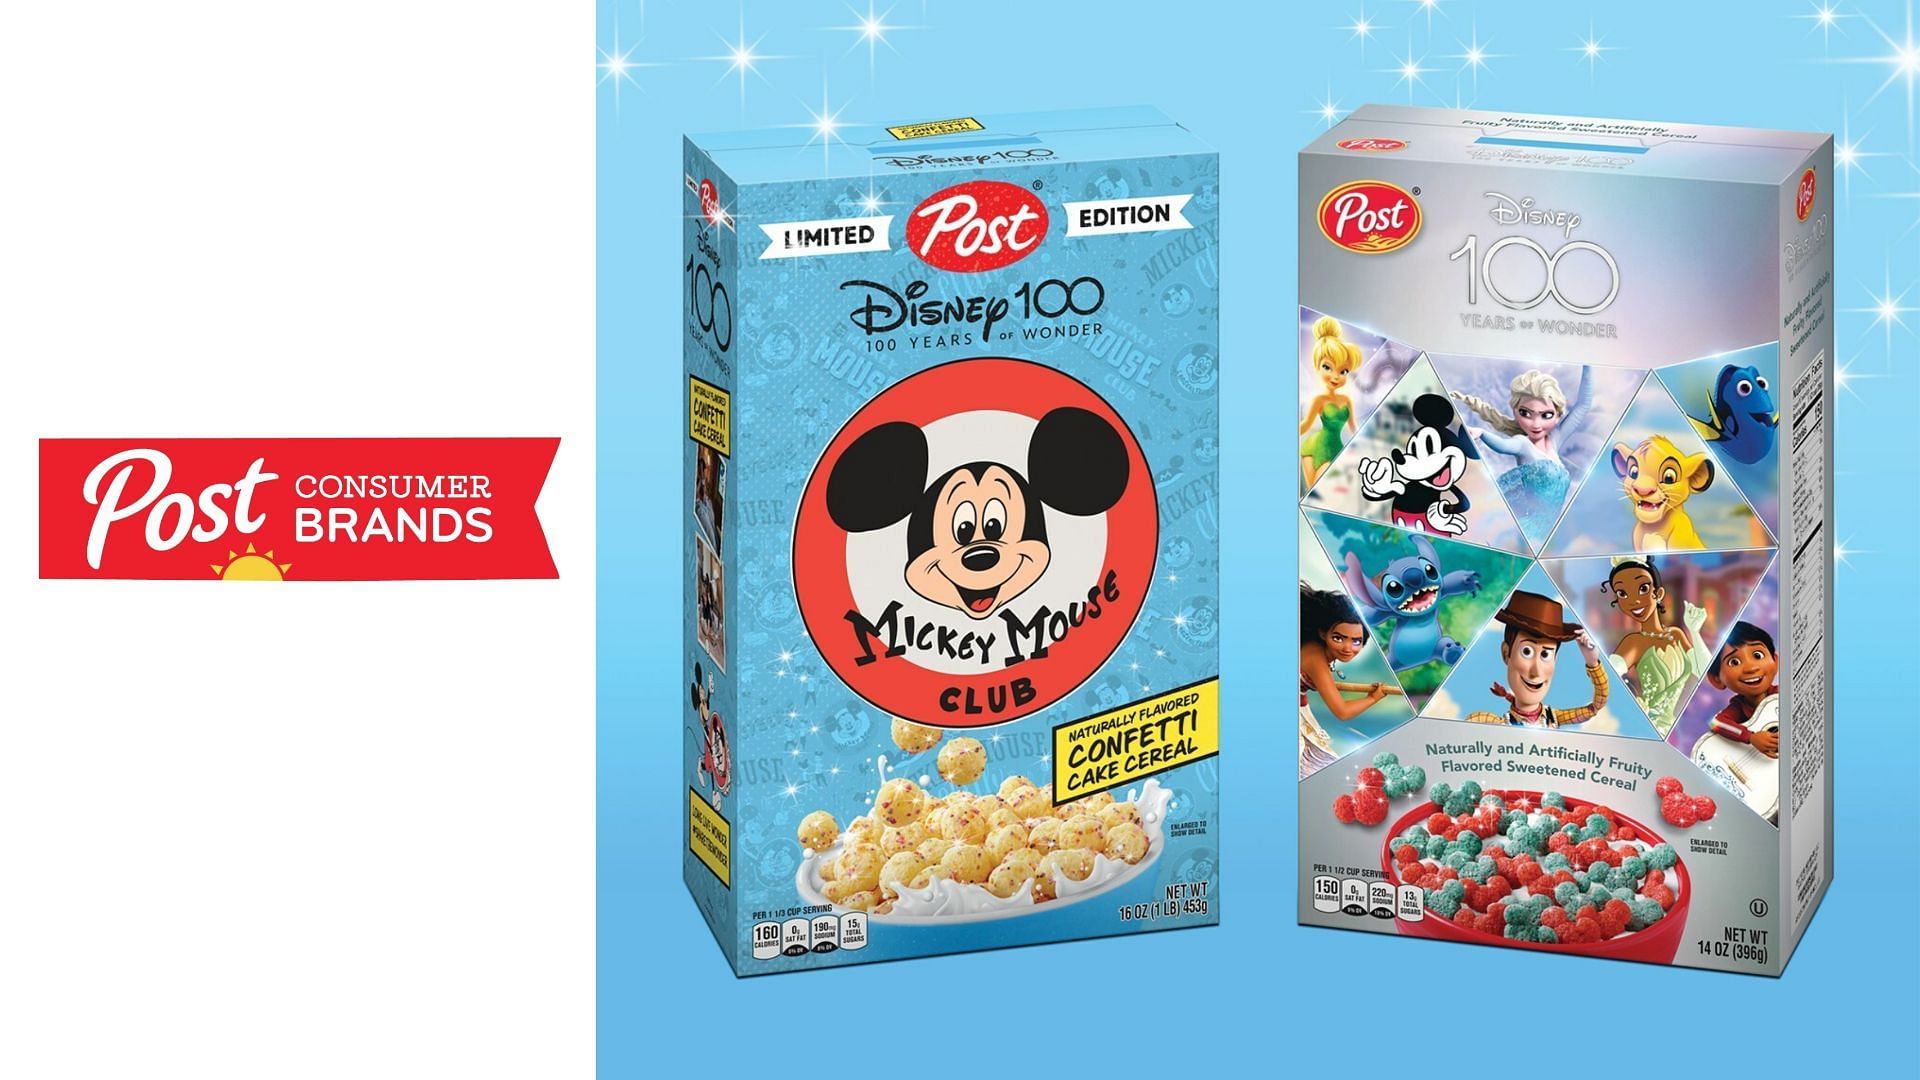 Post Cereals partners with Disney for the launch of the new Disney Cereals (Image via Post Cereals)